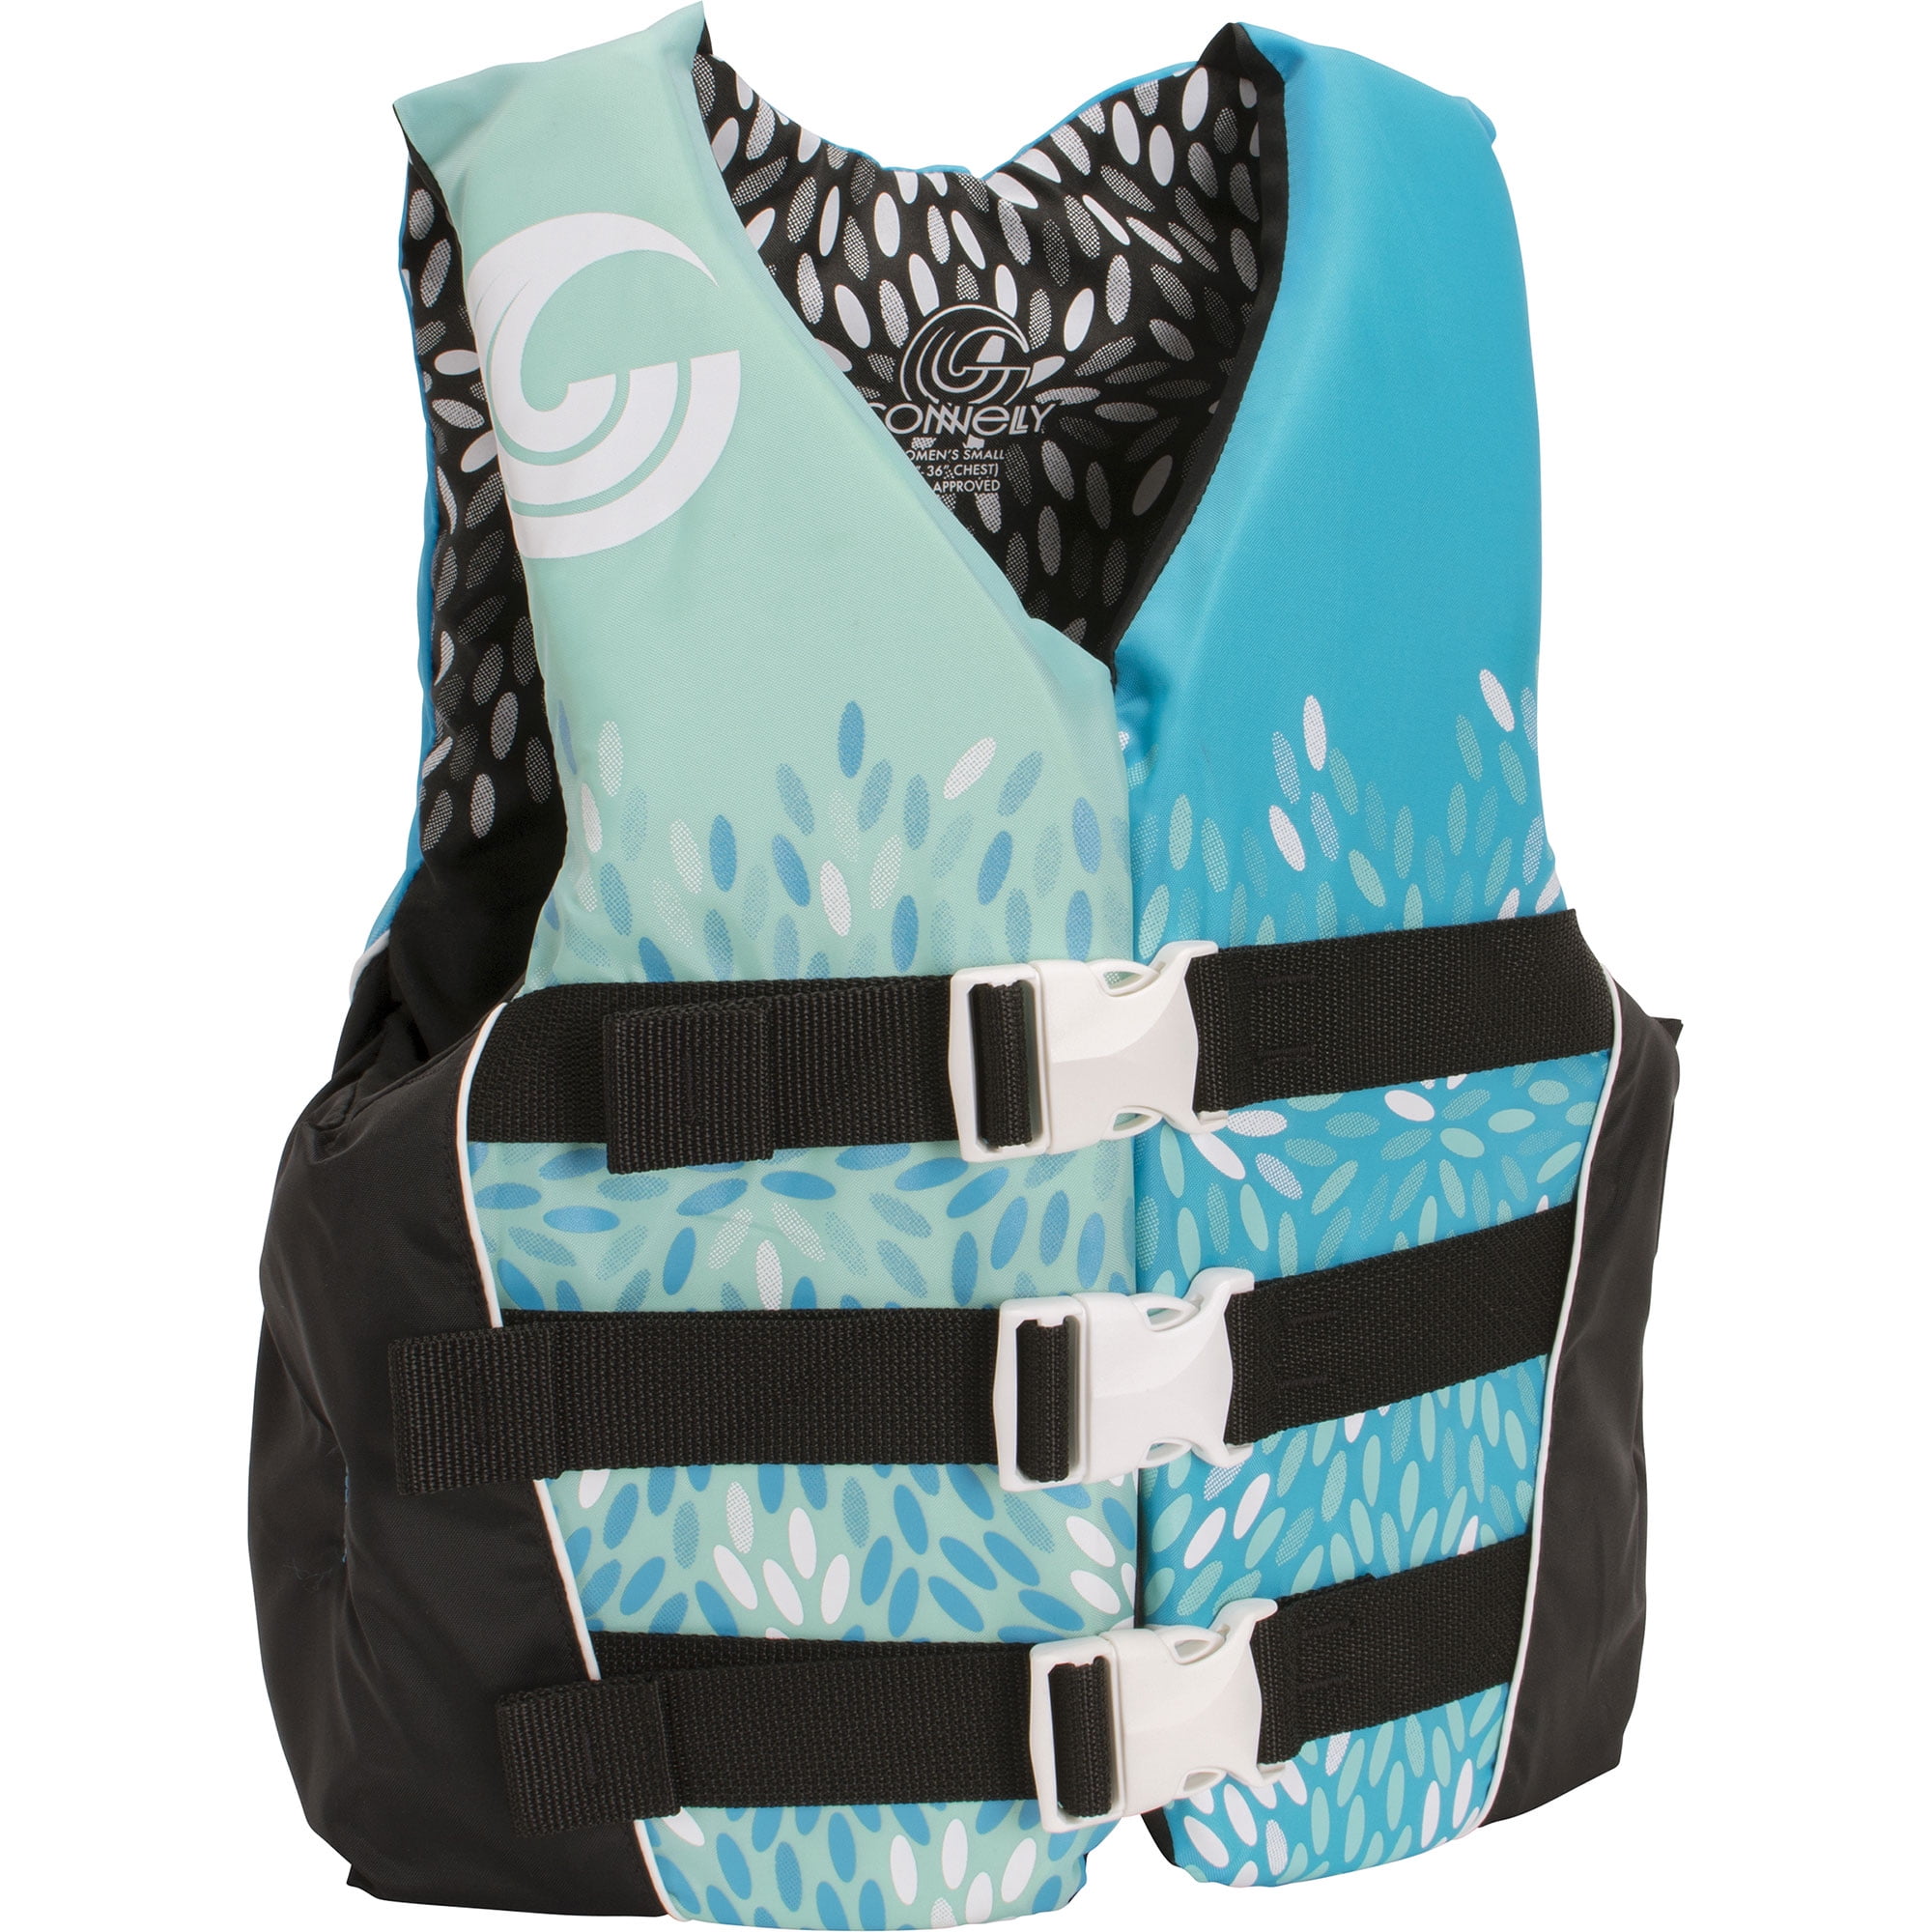 CWB Connelly Womens Nylon Life Water Vest Slimming Safe Jacket, Blue, Large